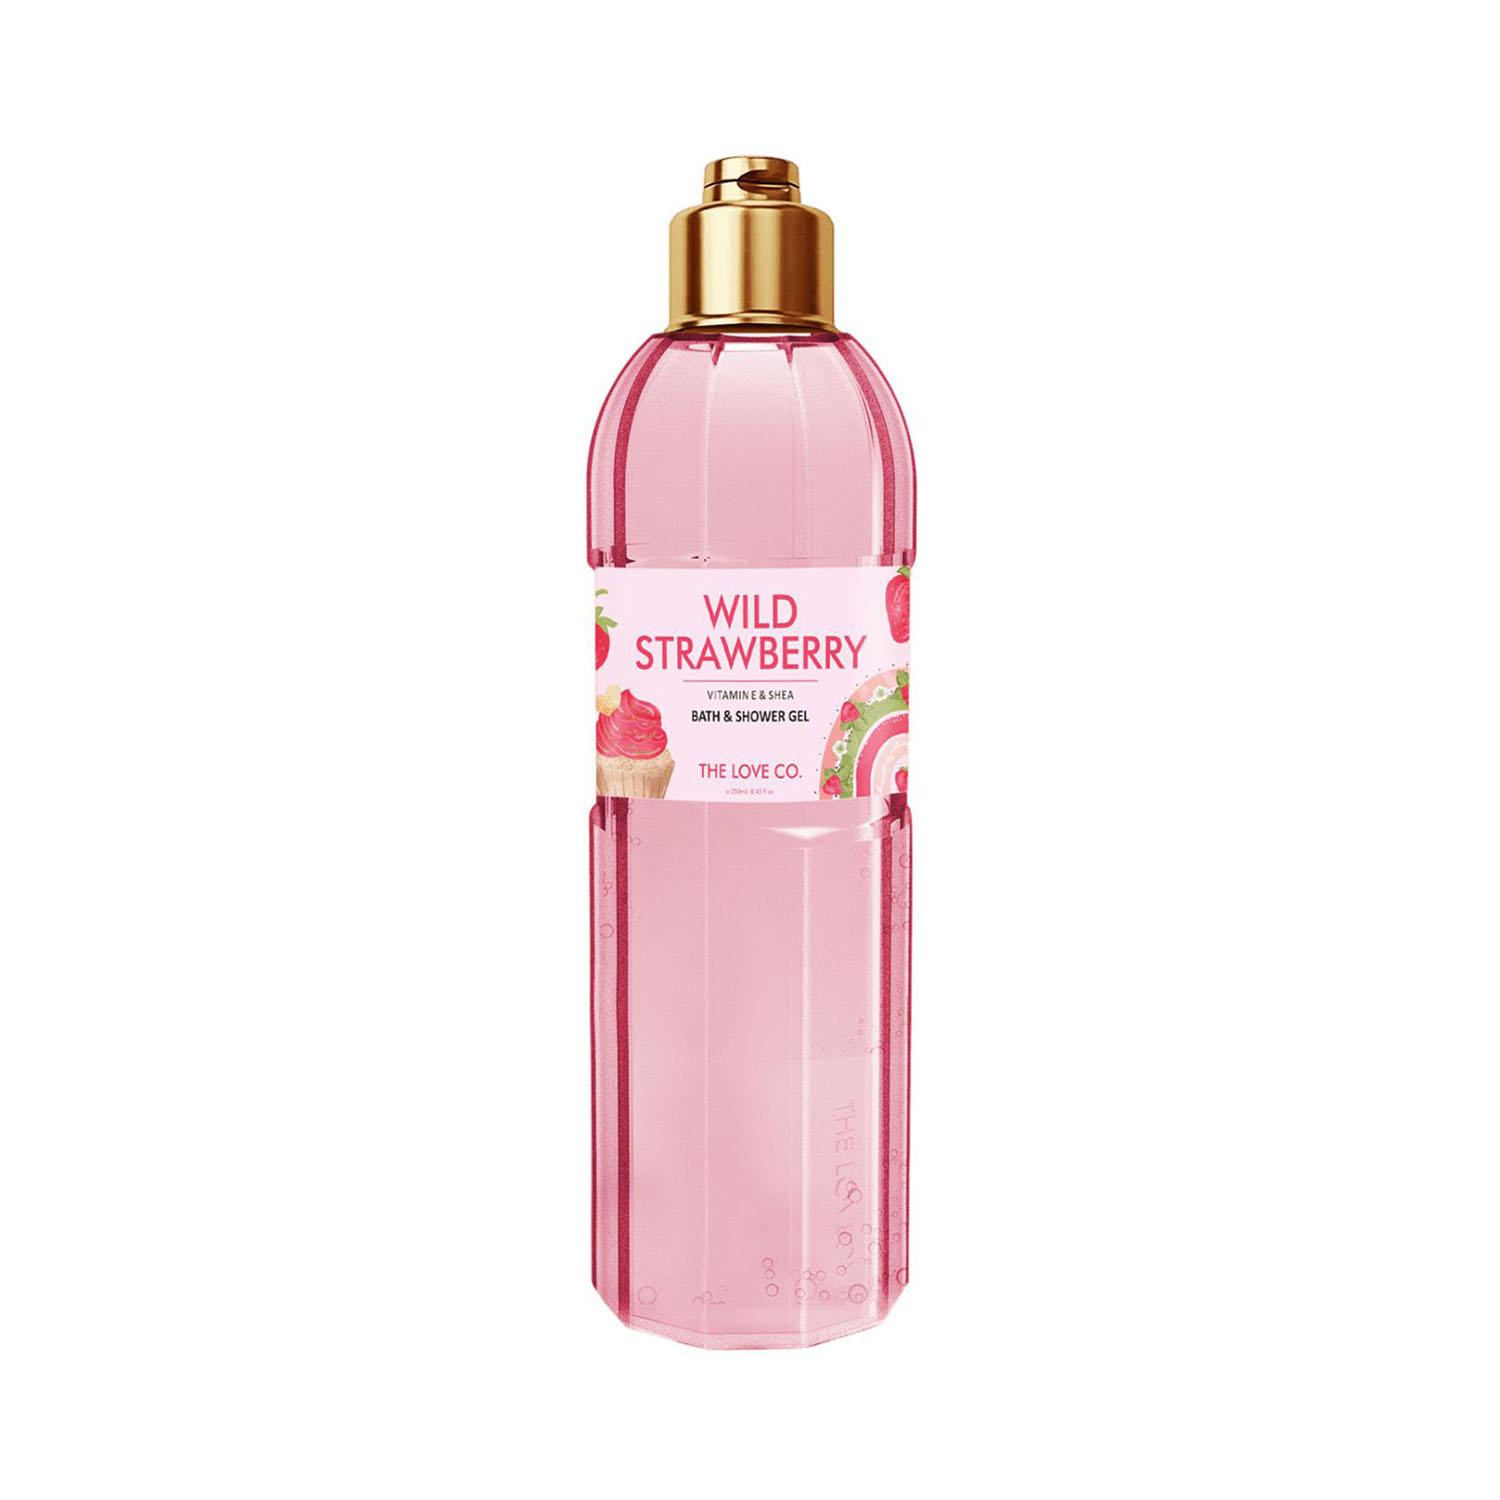 THE LOVE CO. Wild Strawberry Bath and Shower Gel (250ml)